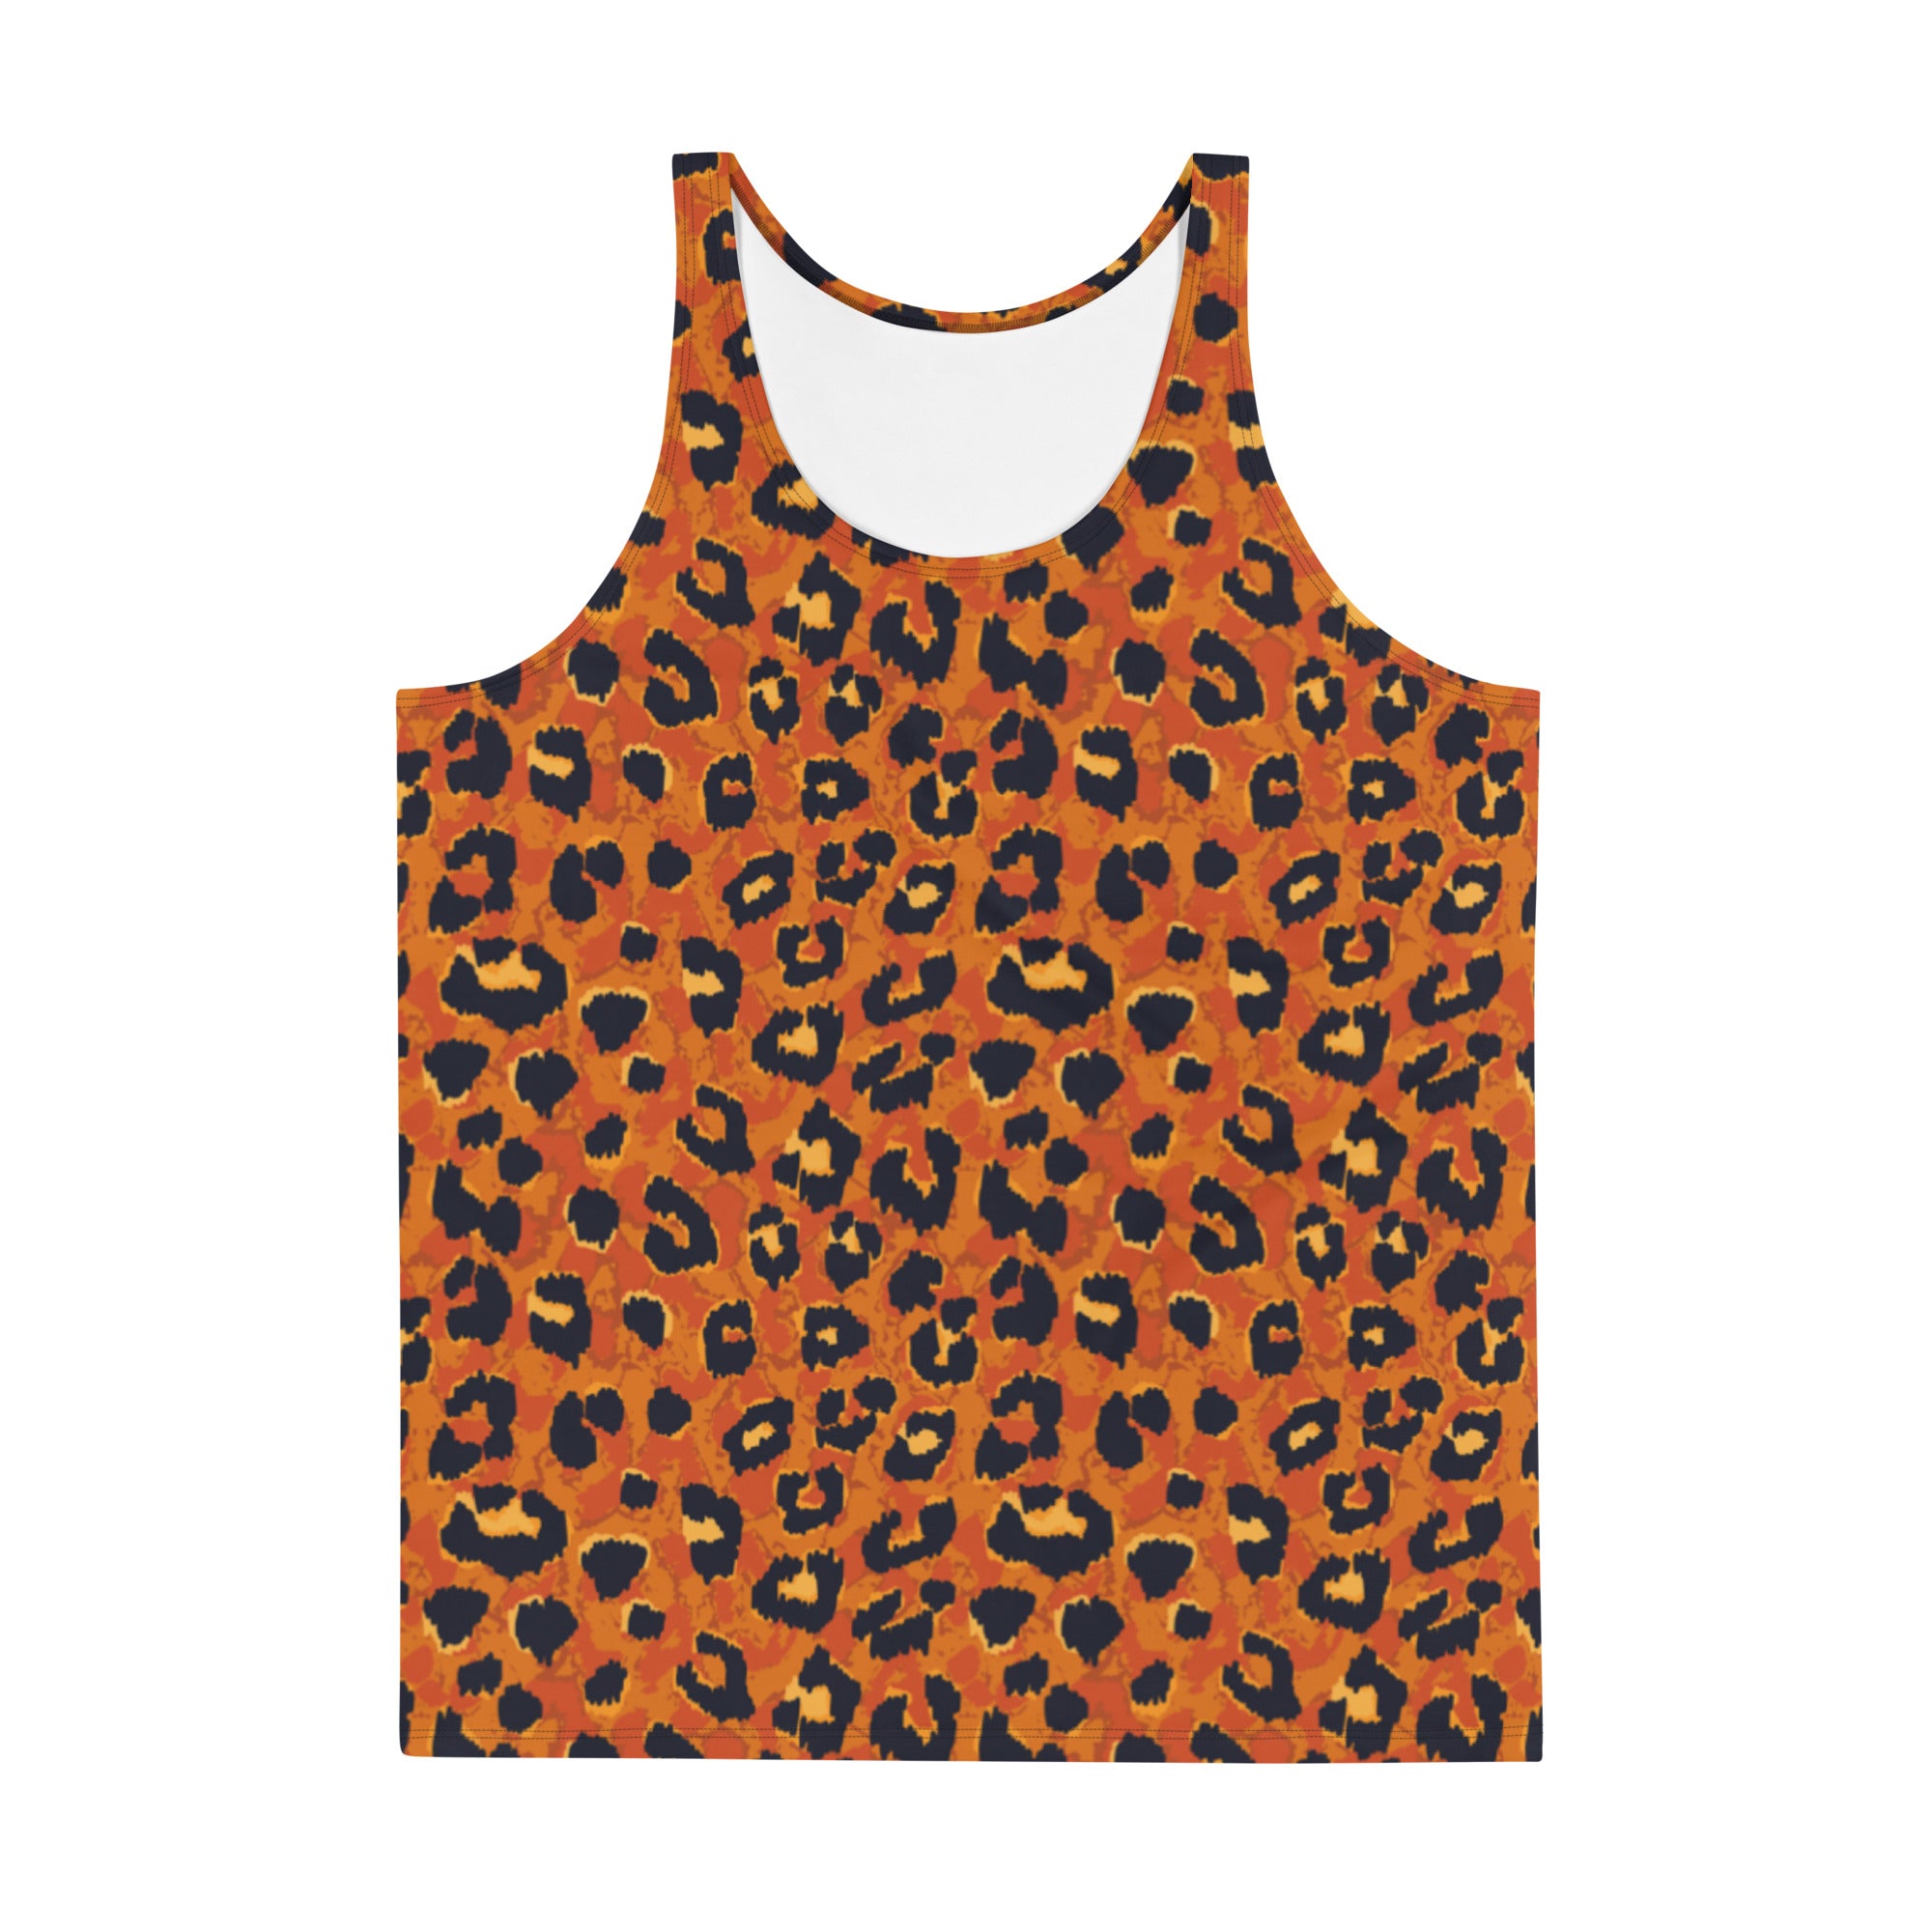 CHESTER TANK TOP